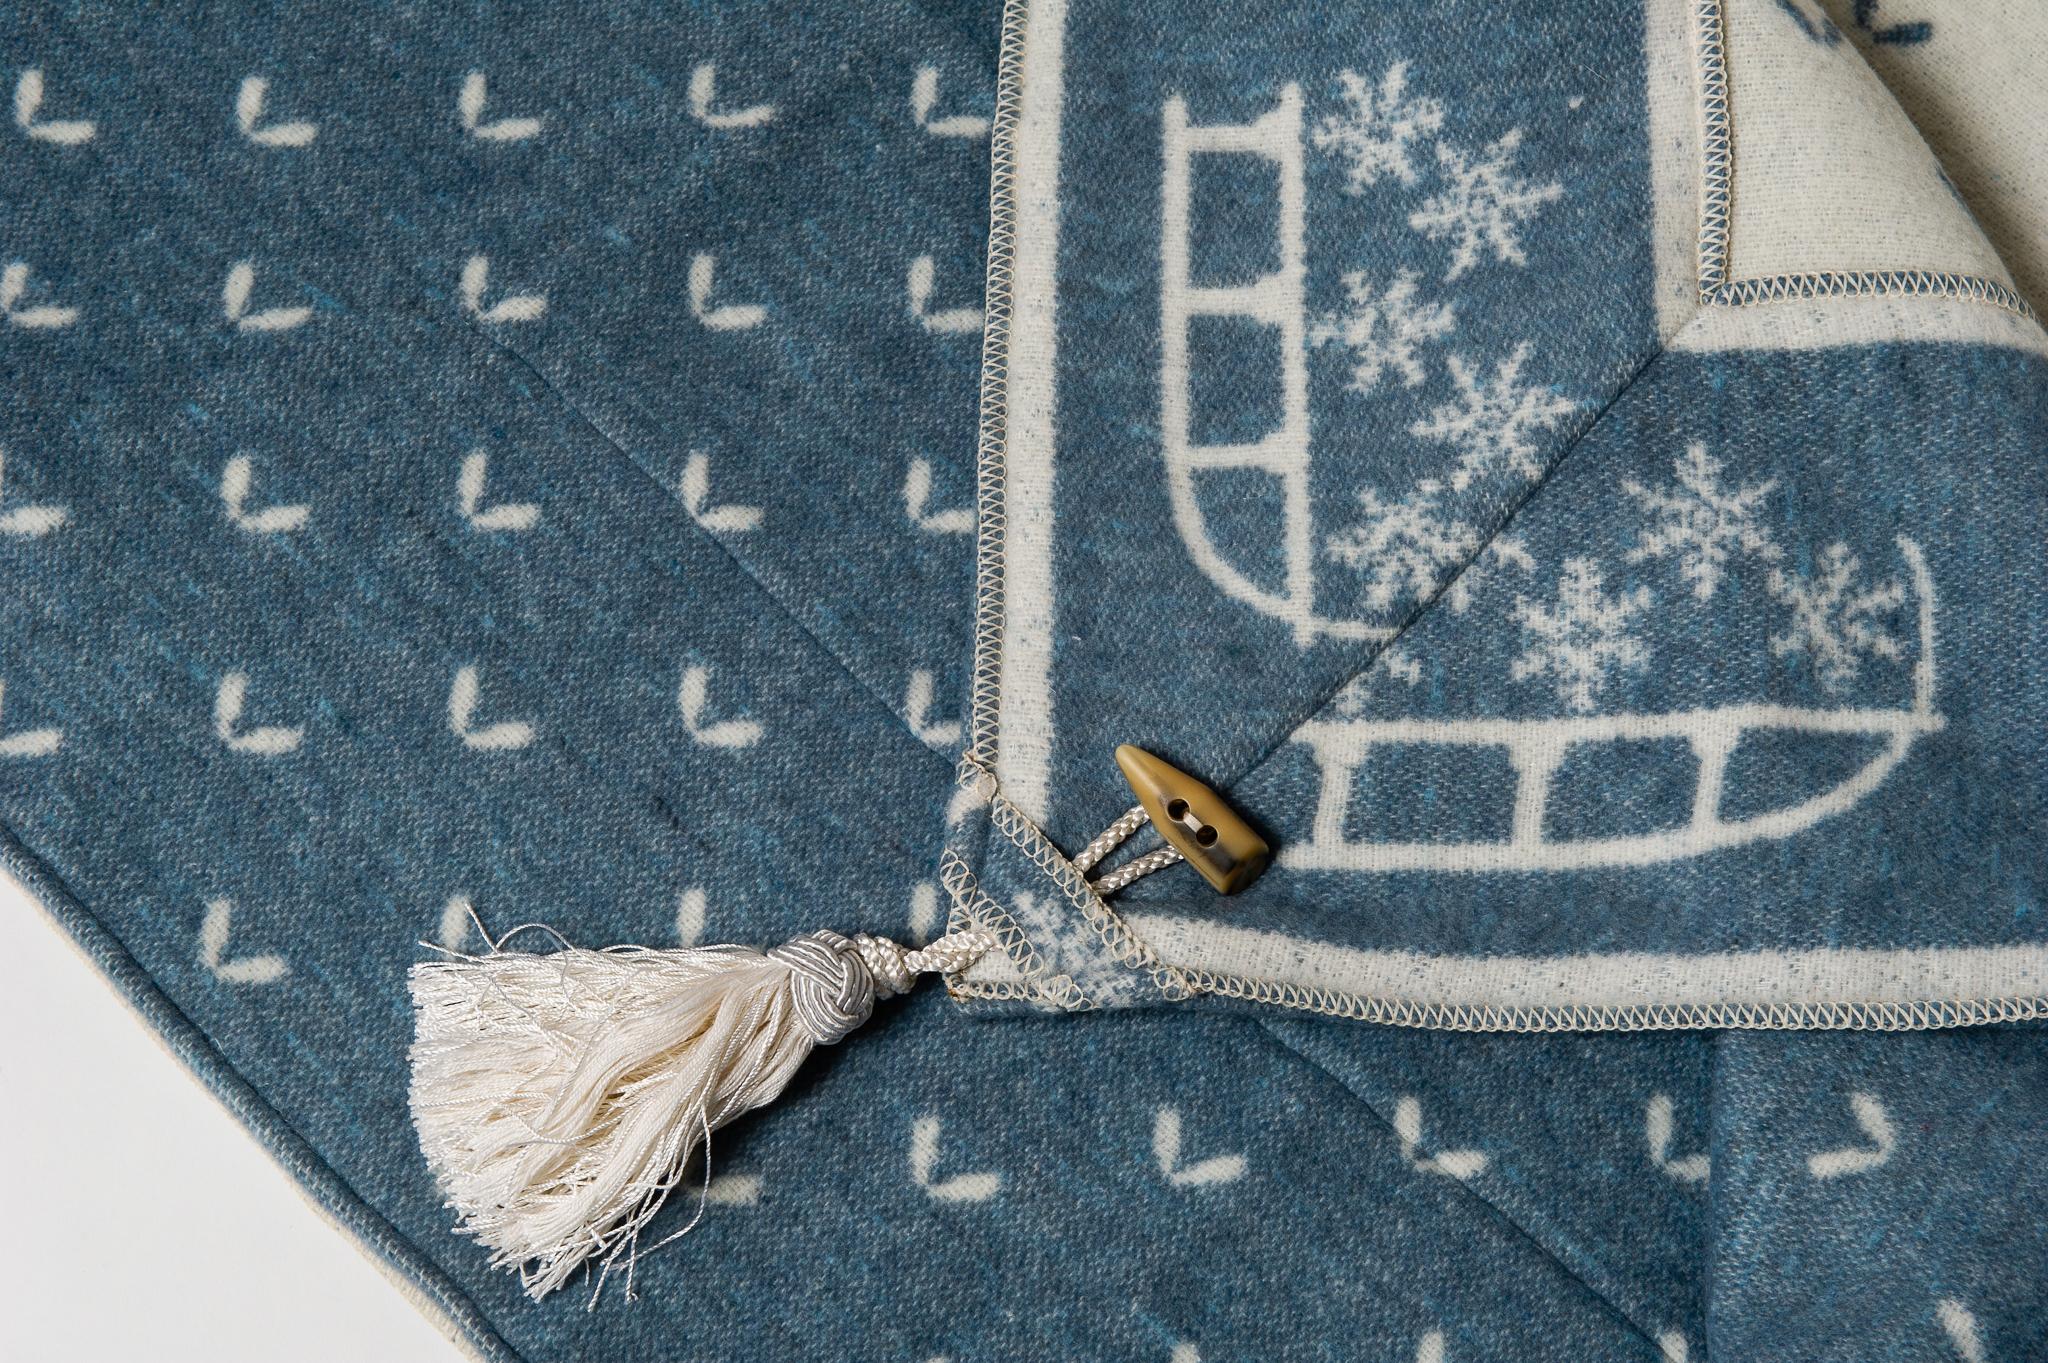 Typical Swiss wool plaid by Altalena : light blue and white, border with sleds, trimmings in corners and Horn buttons - A beautiful and warm item for Your relax -
B/2232 -.